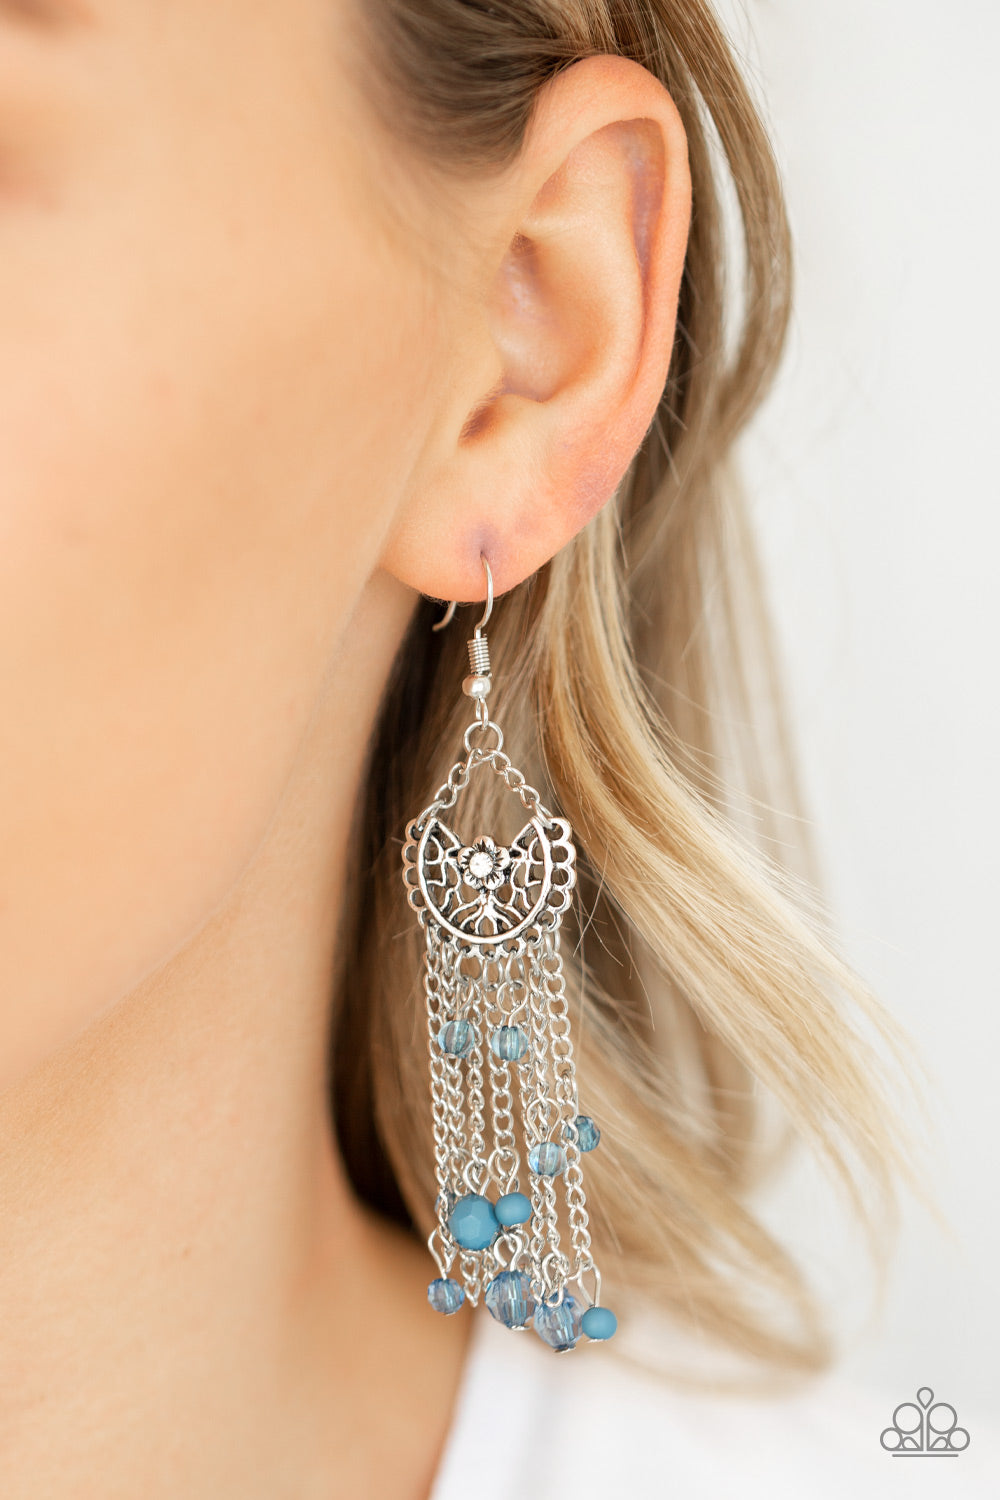 Daisy Daydreams Blue Earring Paparazzi Accessories